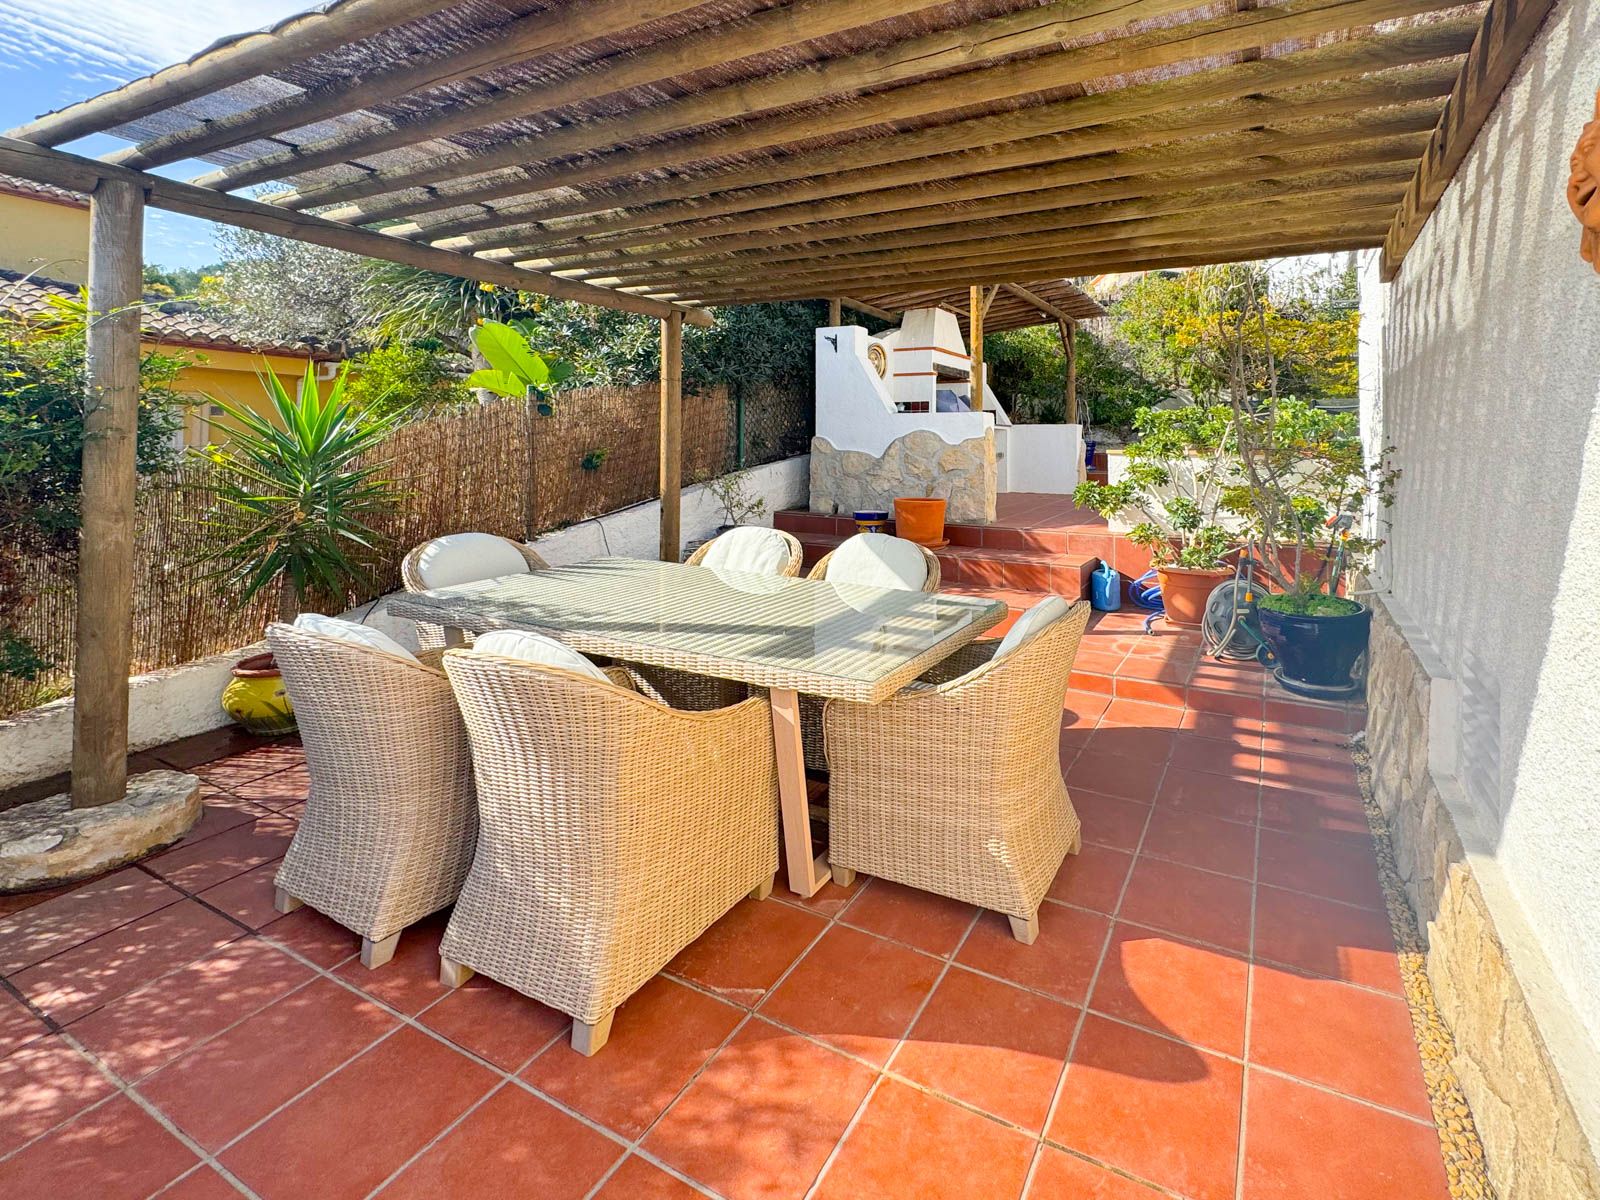 3 bedroom villa in a tranquil area close to the beach